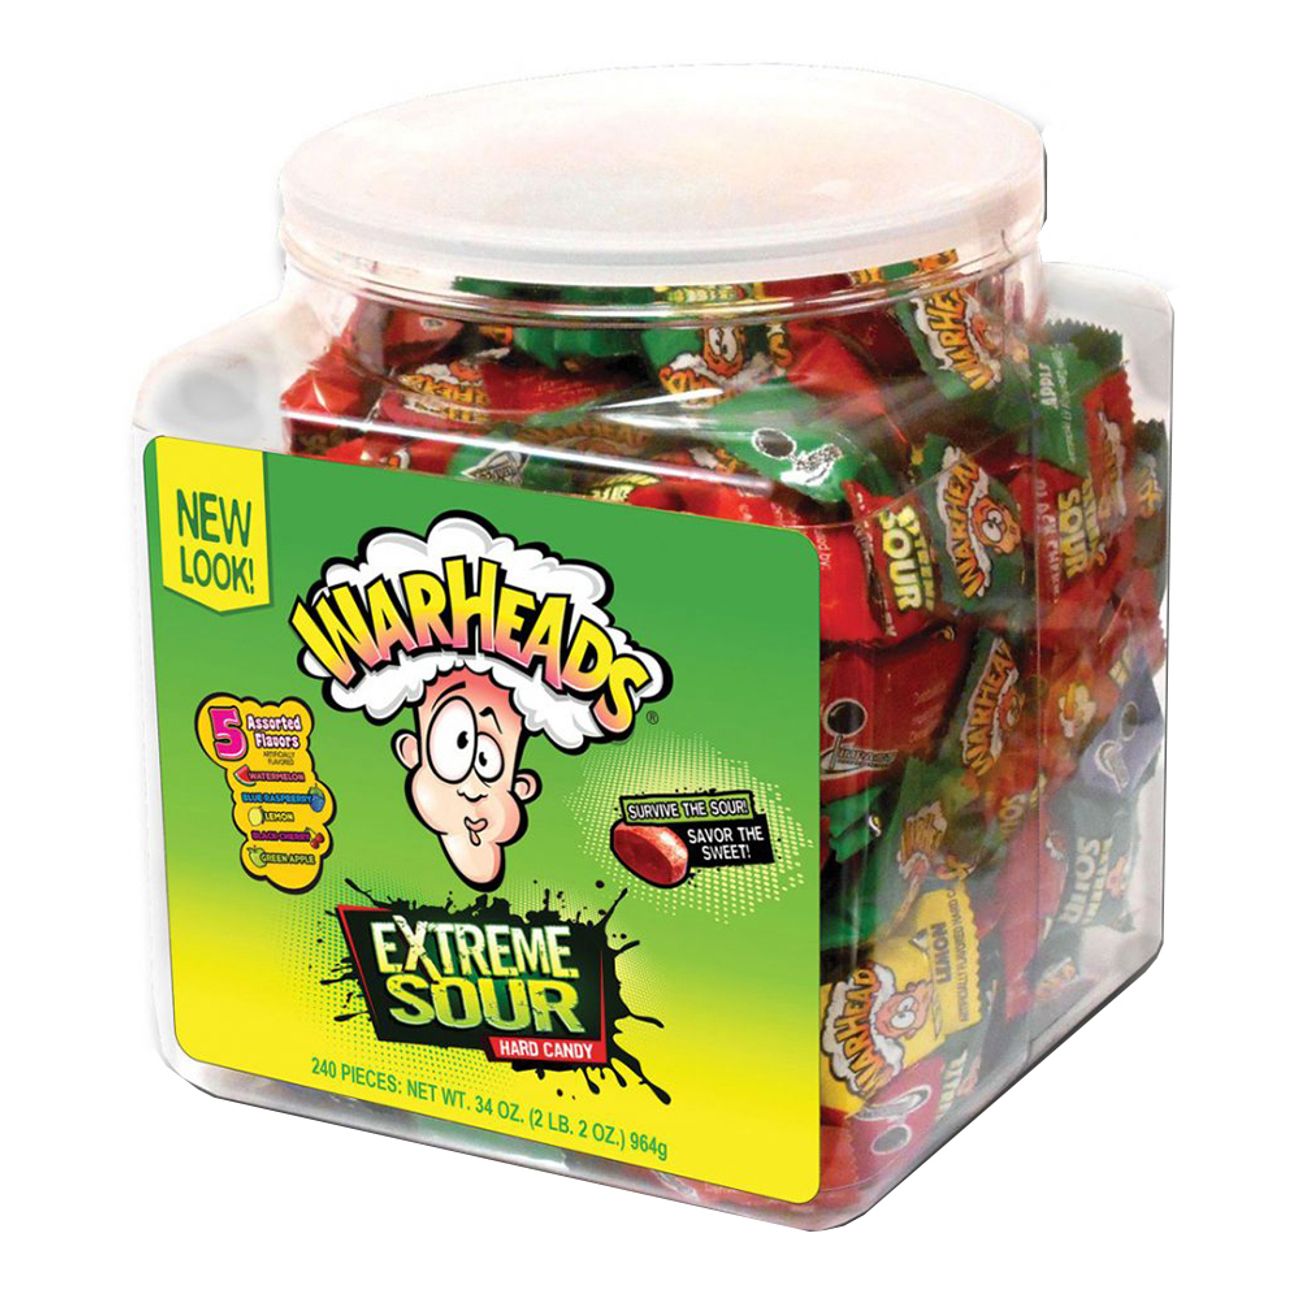 warheads-extreme-sour-candy-1